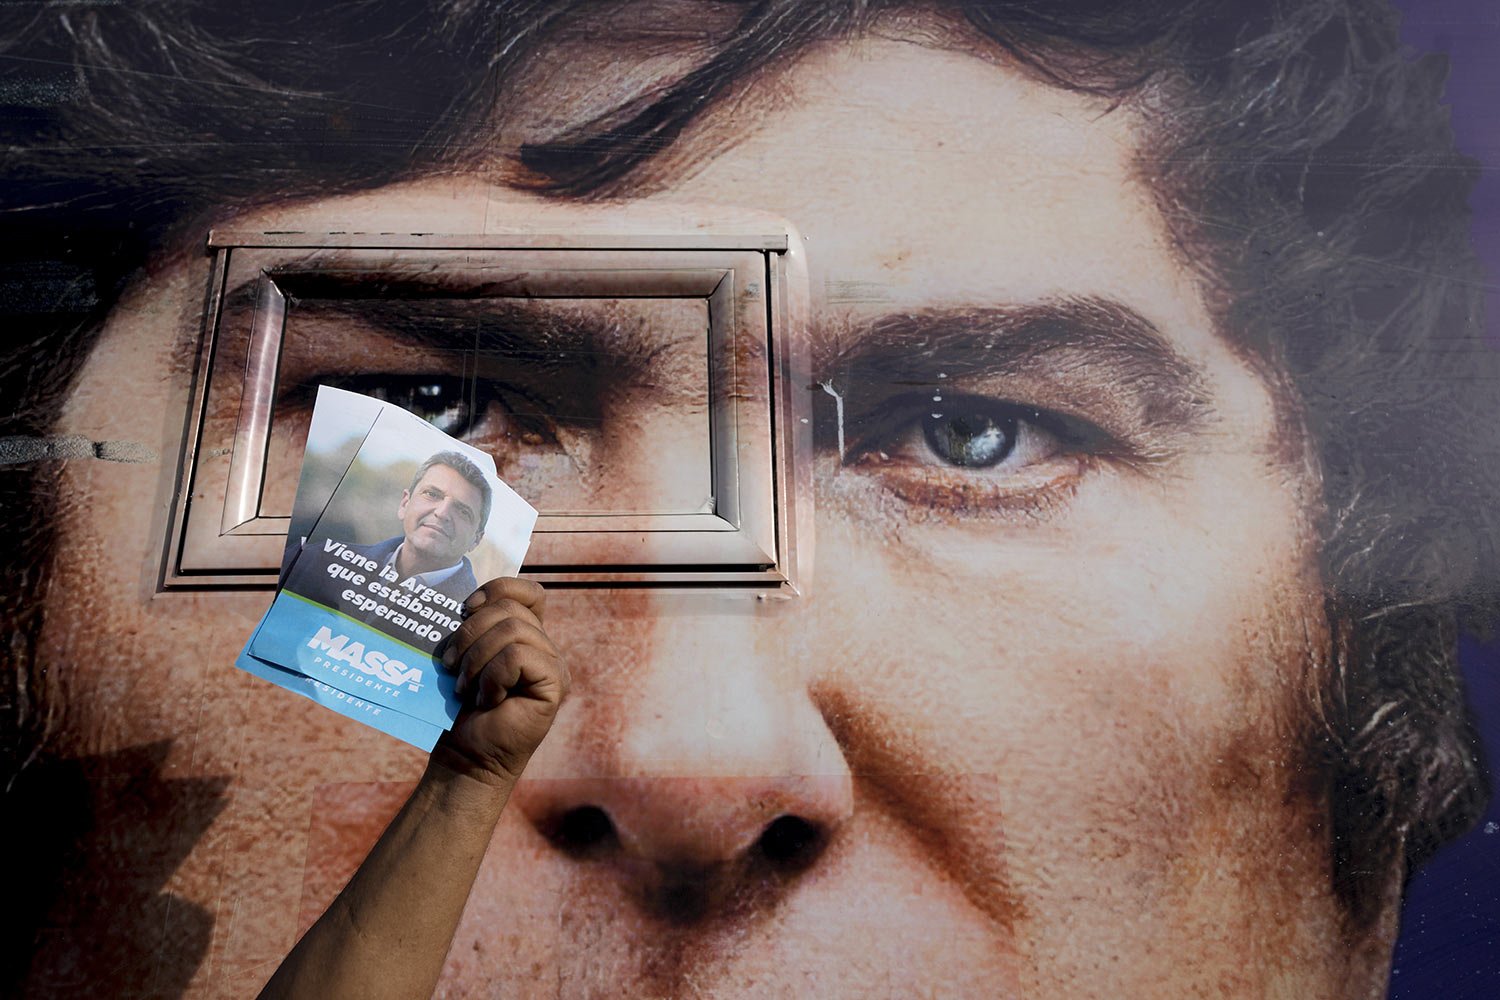  A supporter of the ruling party presidential candidate, holds up flyers promoting Sergio Massa in front of a campaign bus emblazoned with an image of opponent Javier Milei, in Ezeiza, Buenos Aires province, Nov. 15, 2023. (AP Photo/Natacha Pisarenko